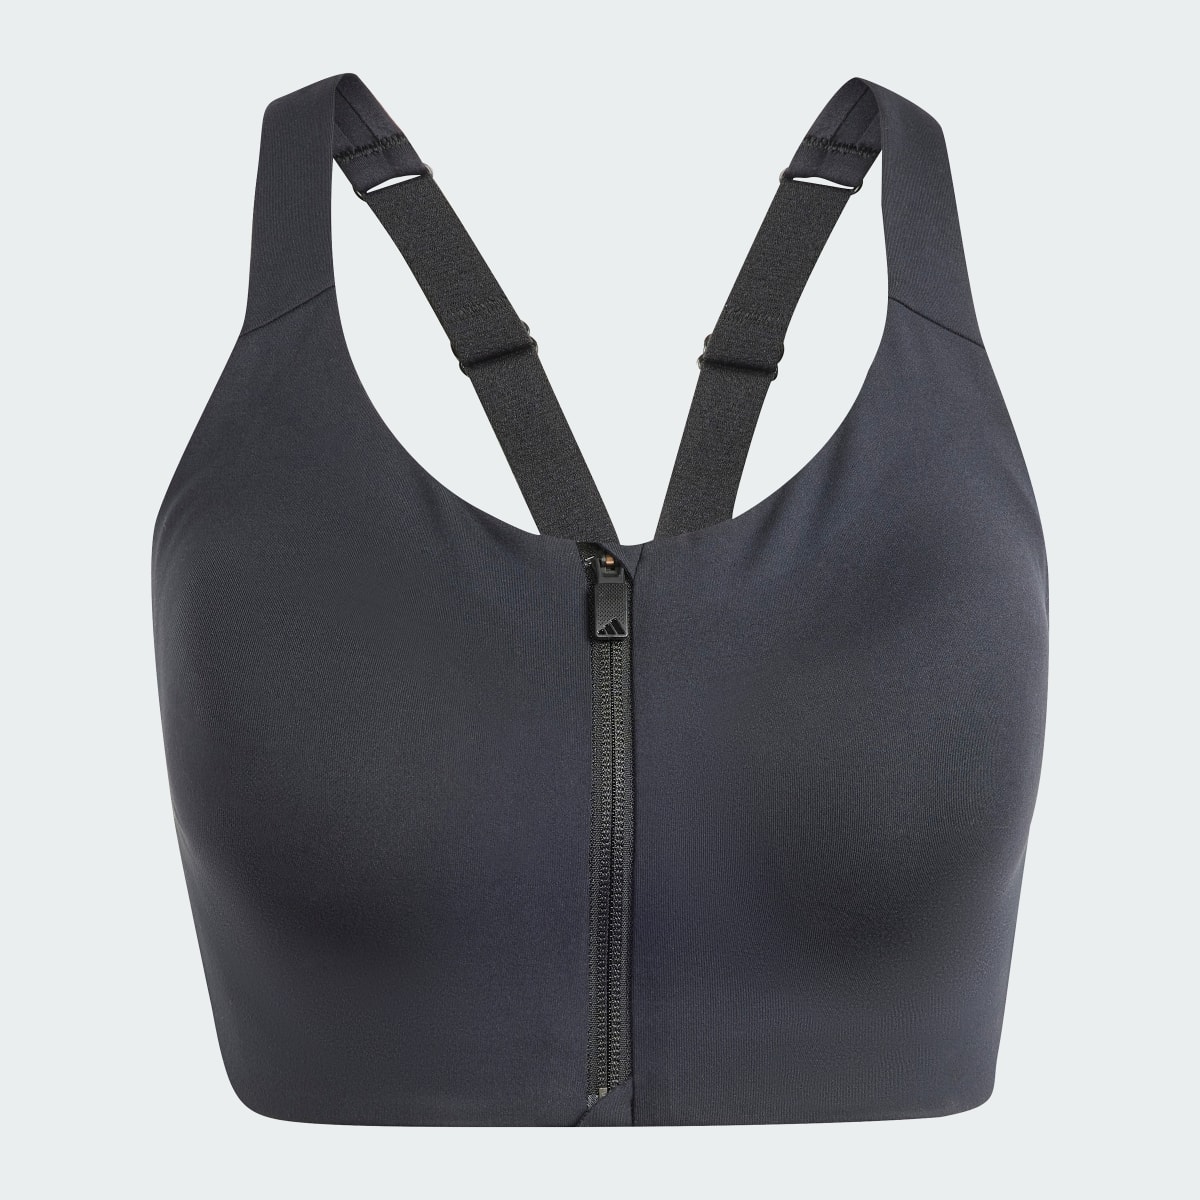 Adidas Brassière zippée maintien fort TLRD Impact Luxe. 6